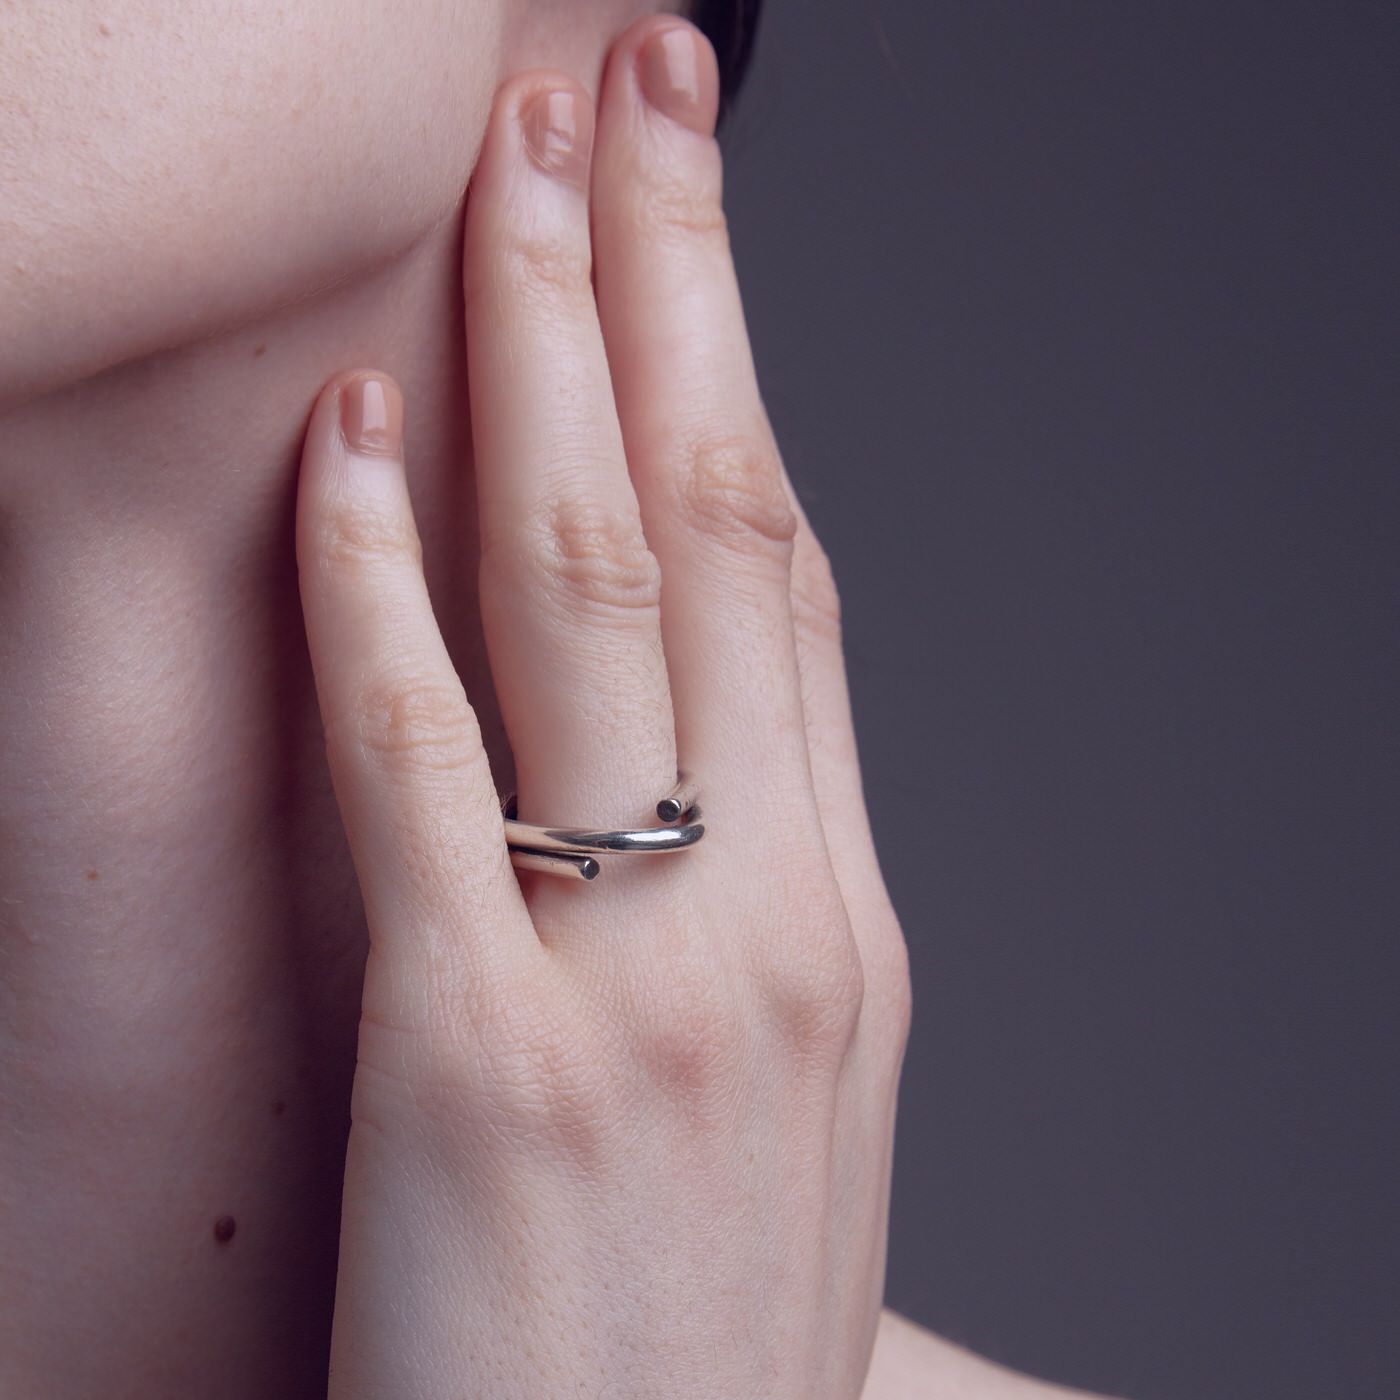 innan jewellery sterling silver chaotic petite infinity ring in stock